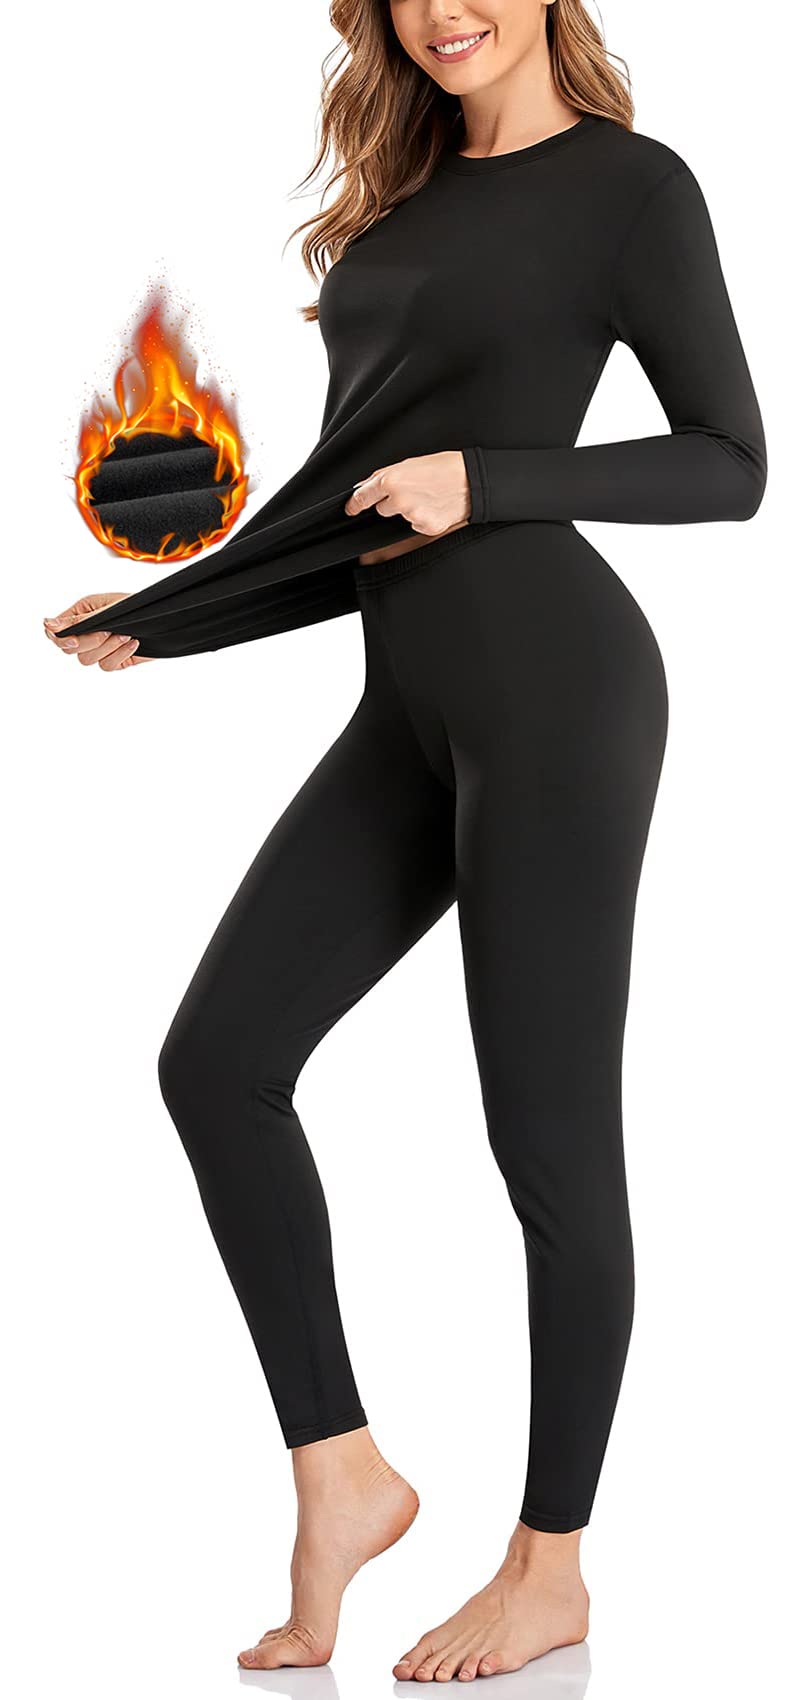 HEROBIKER Women's Thermal Underwear Set Ultra Soft Top & Bottom Base layer  Long Johns Winer Warm with Fleece Lined (Black, X-Small) at  Women's  Clothing store